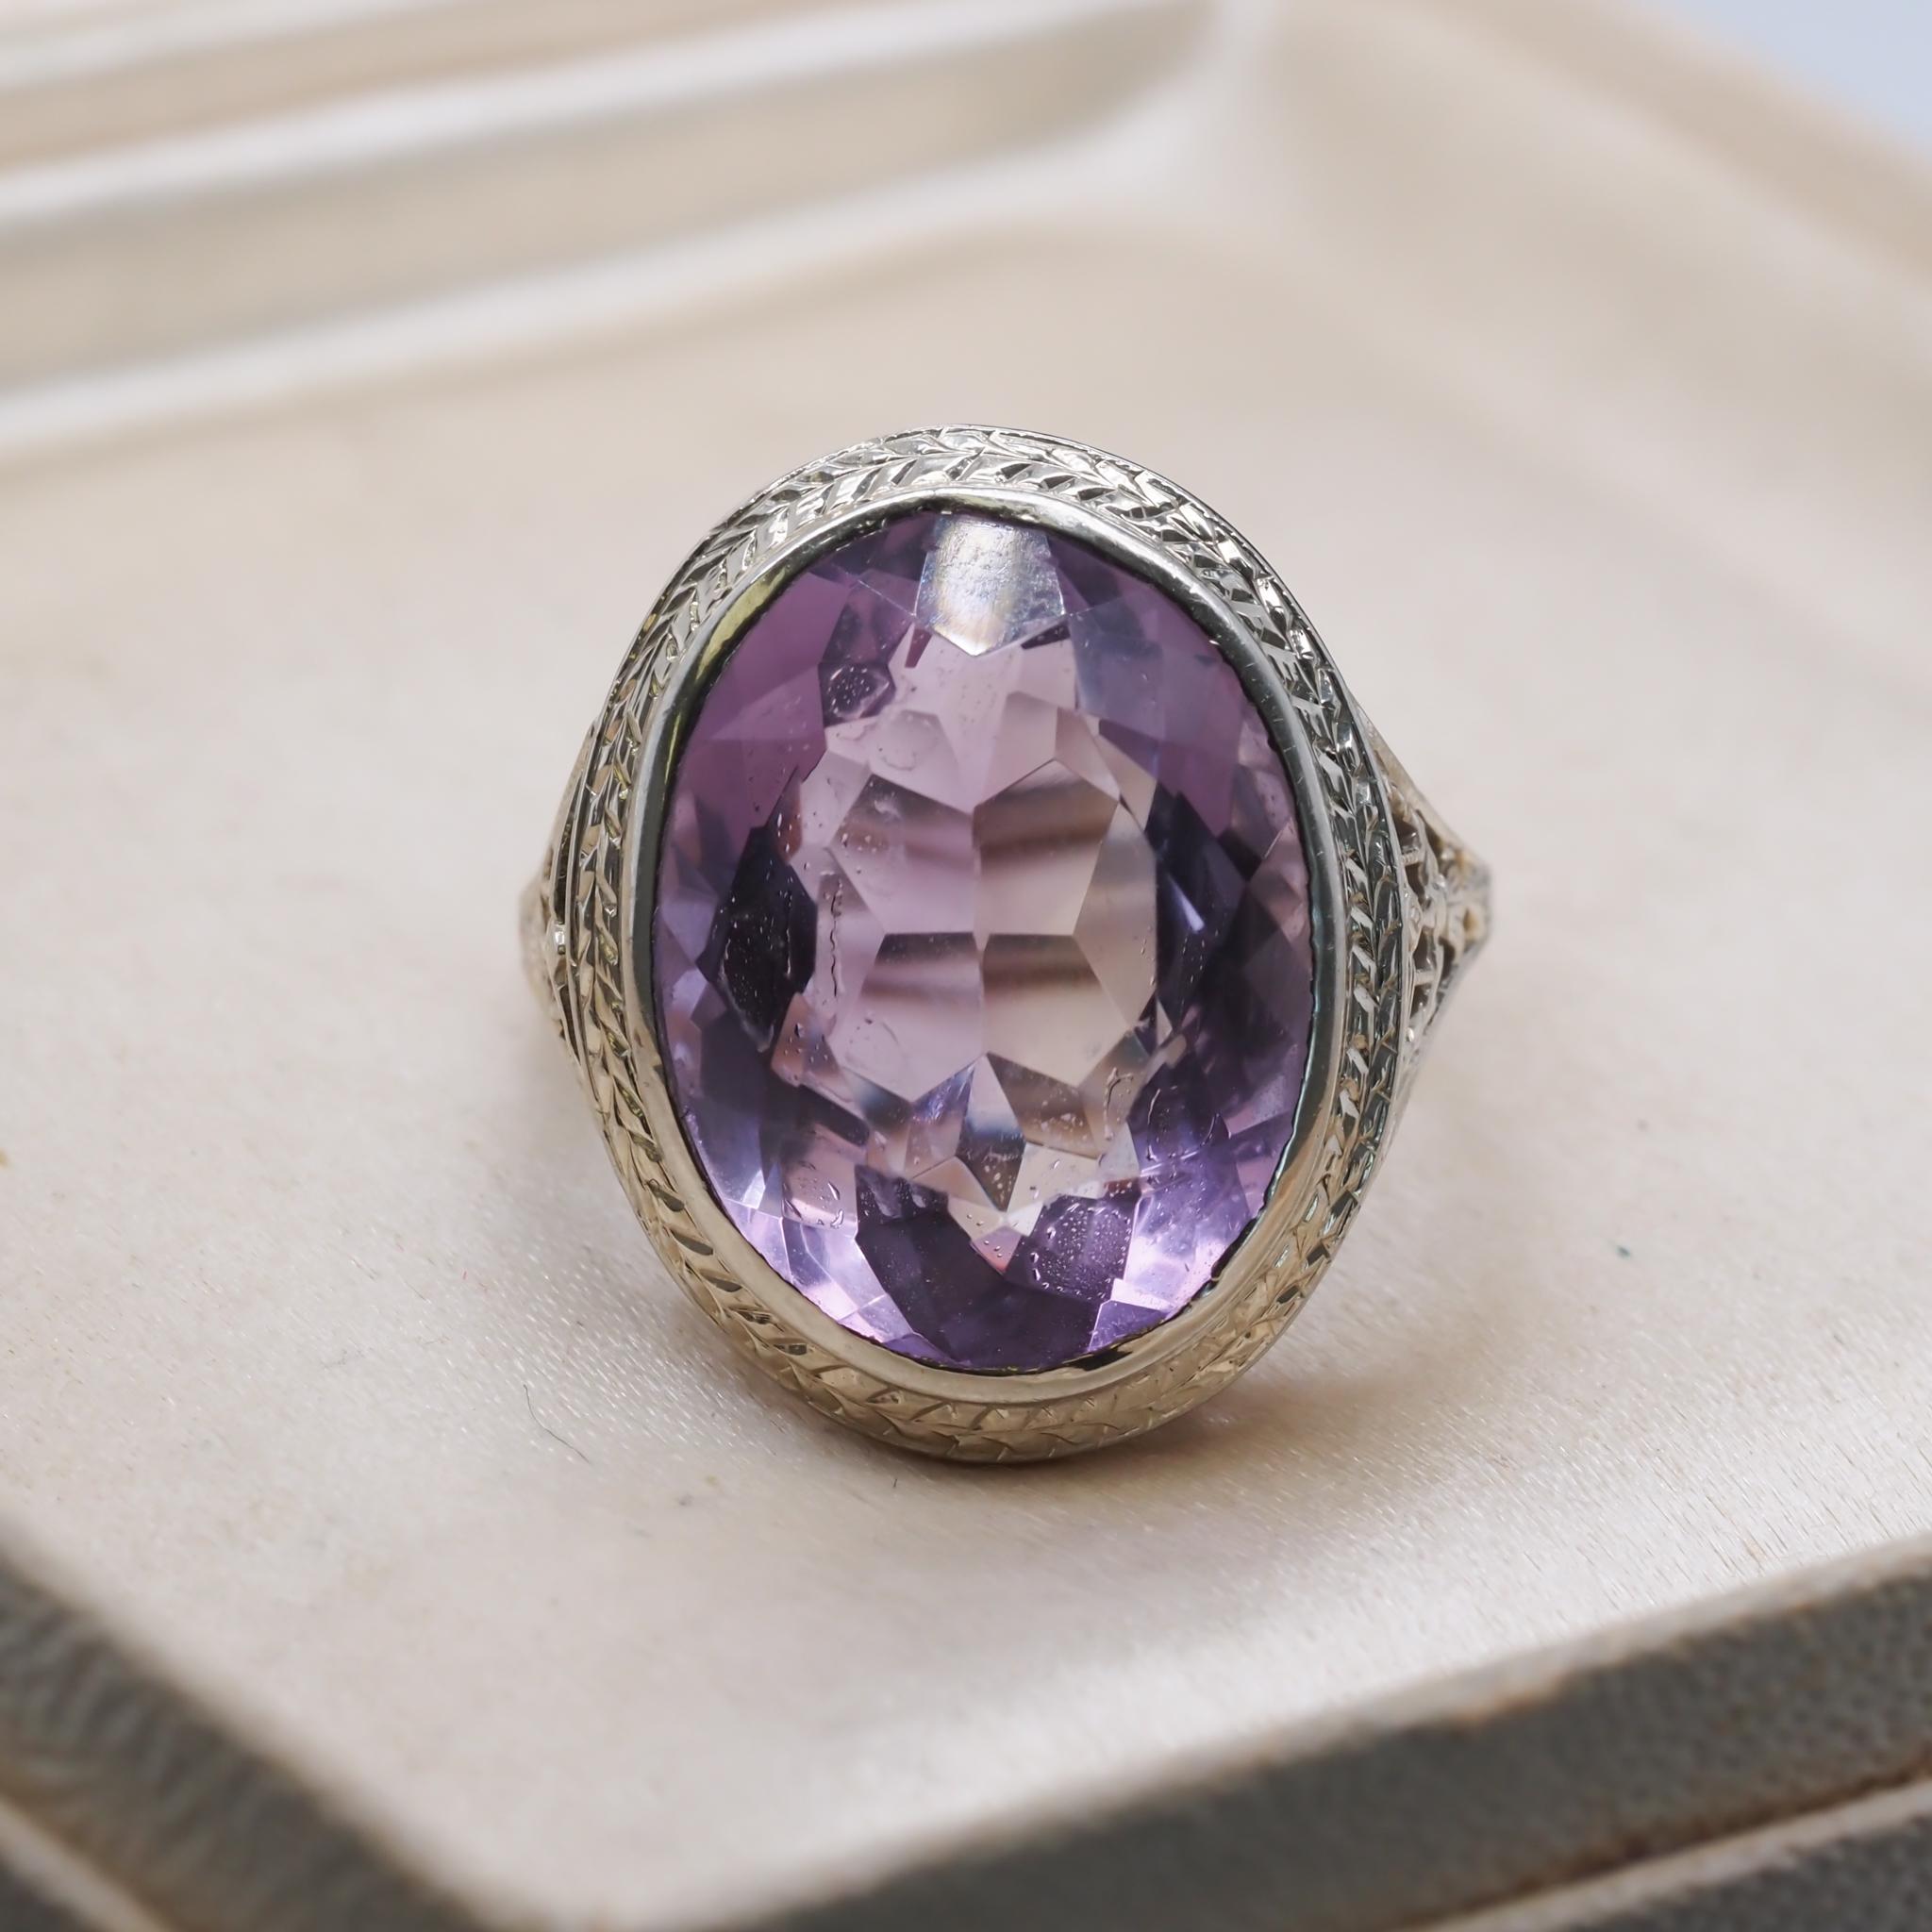 Ring Size: 5
Metal Type: 18K White Gold  [Hallmarked, and Tested]
Weight:  5.0 grams

Details: Oval Shape Amethyst, Natural, 16mm x 12mm

Band Width:  1.5mm
Condition:  Excellent